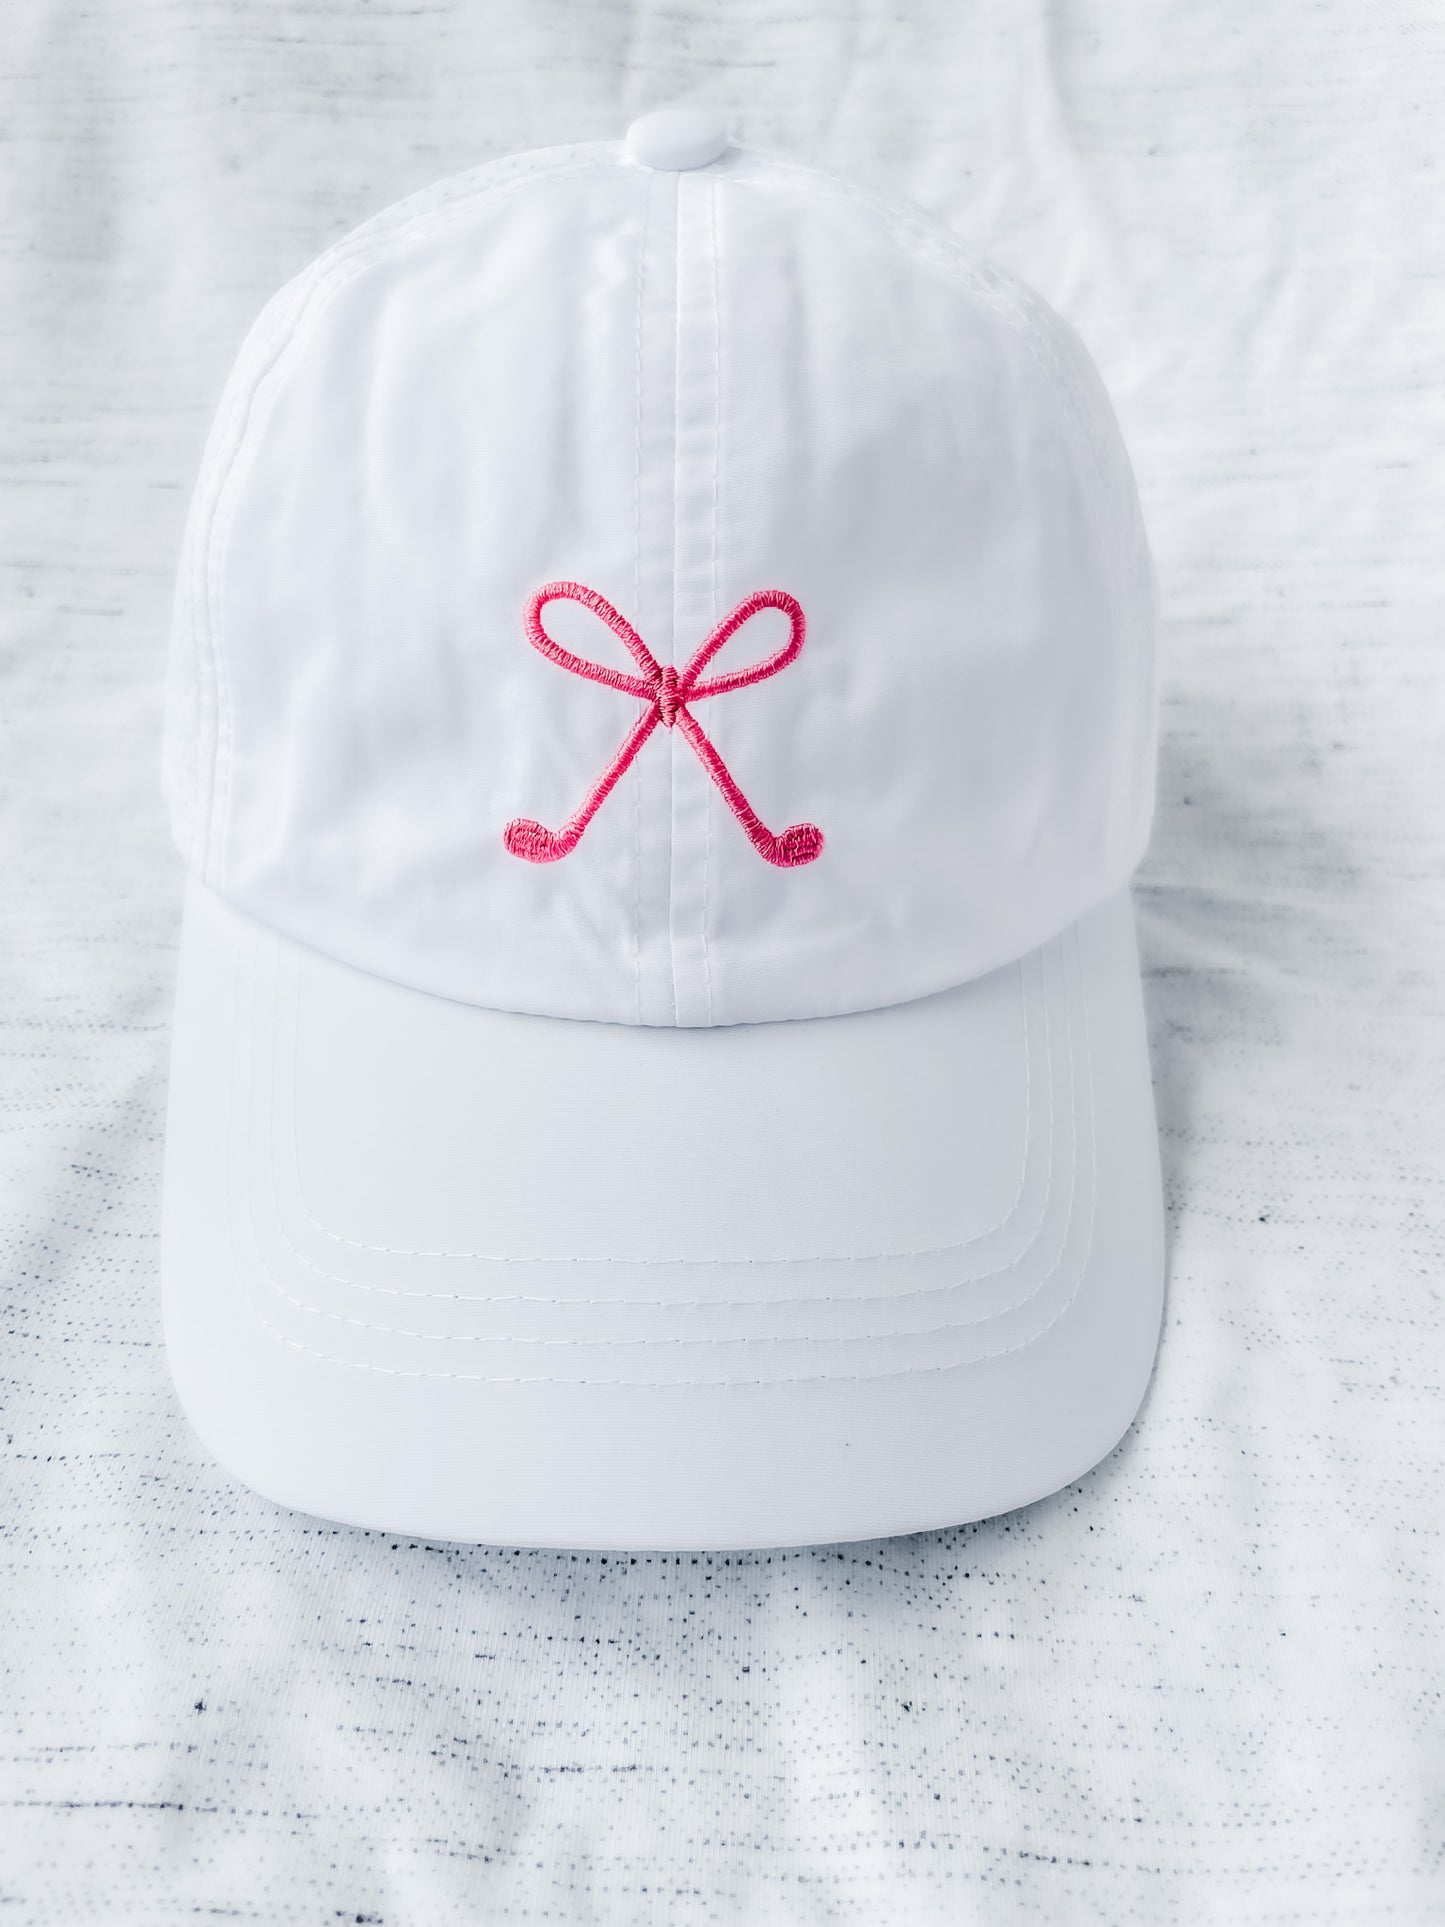 Golf Bow ~ Classic White Cap with Embroidered Bow